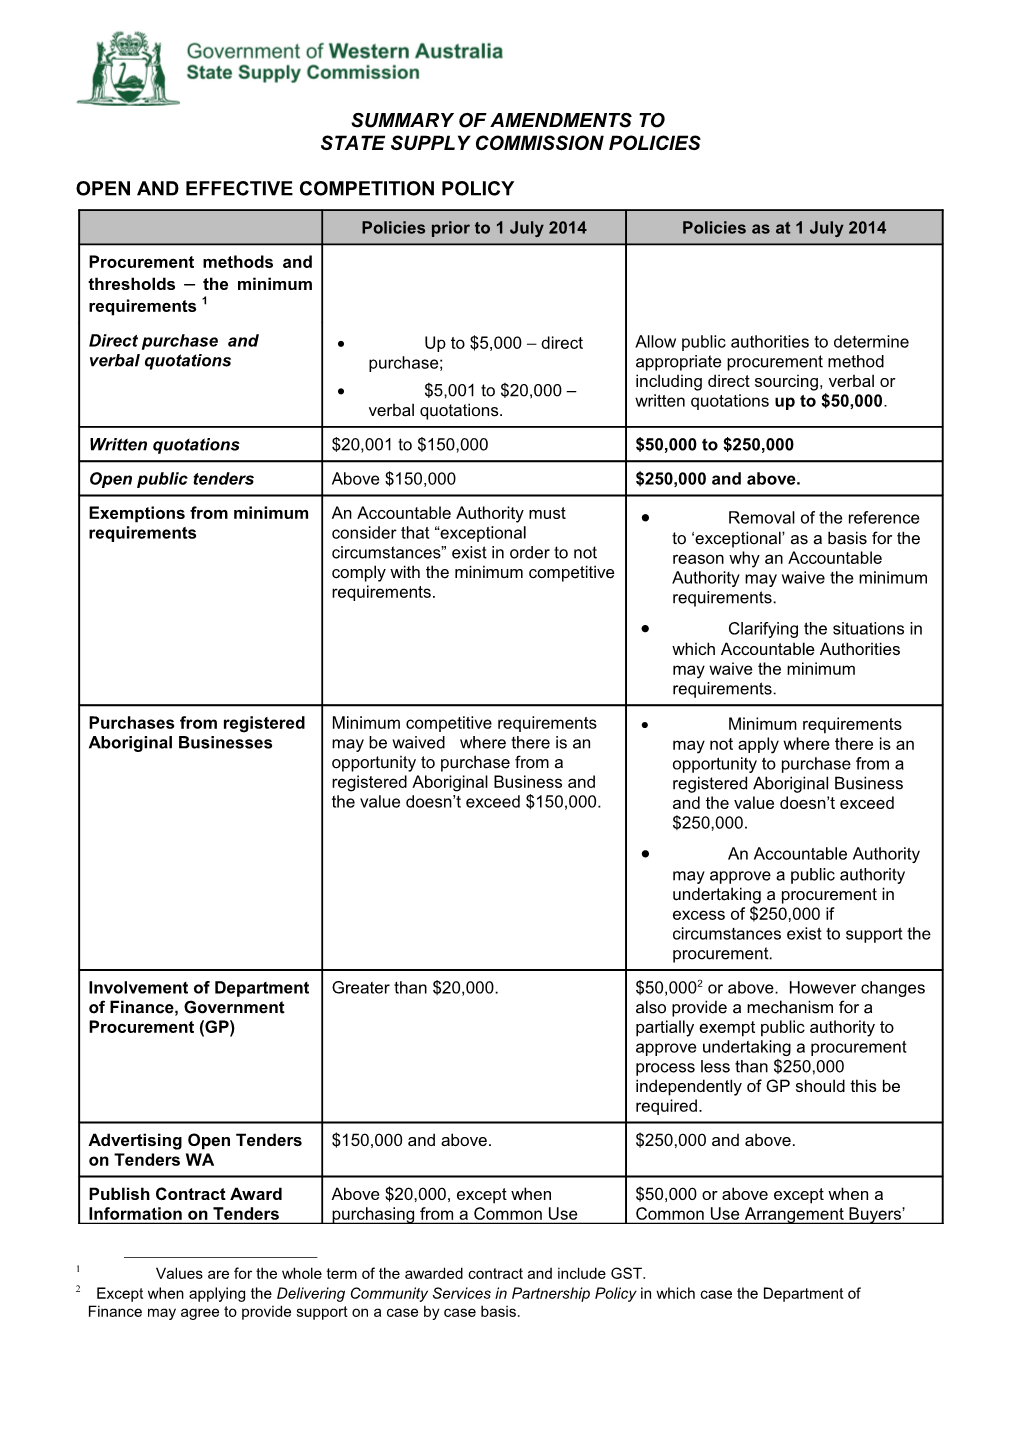 Summary of Amendments to State Supply Commission Policies